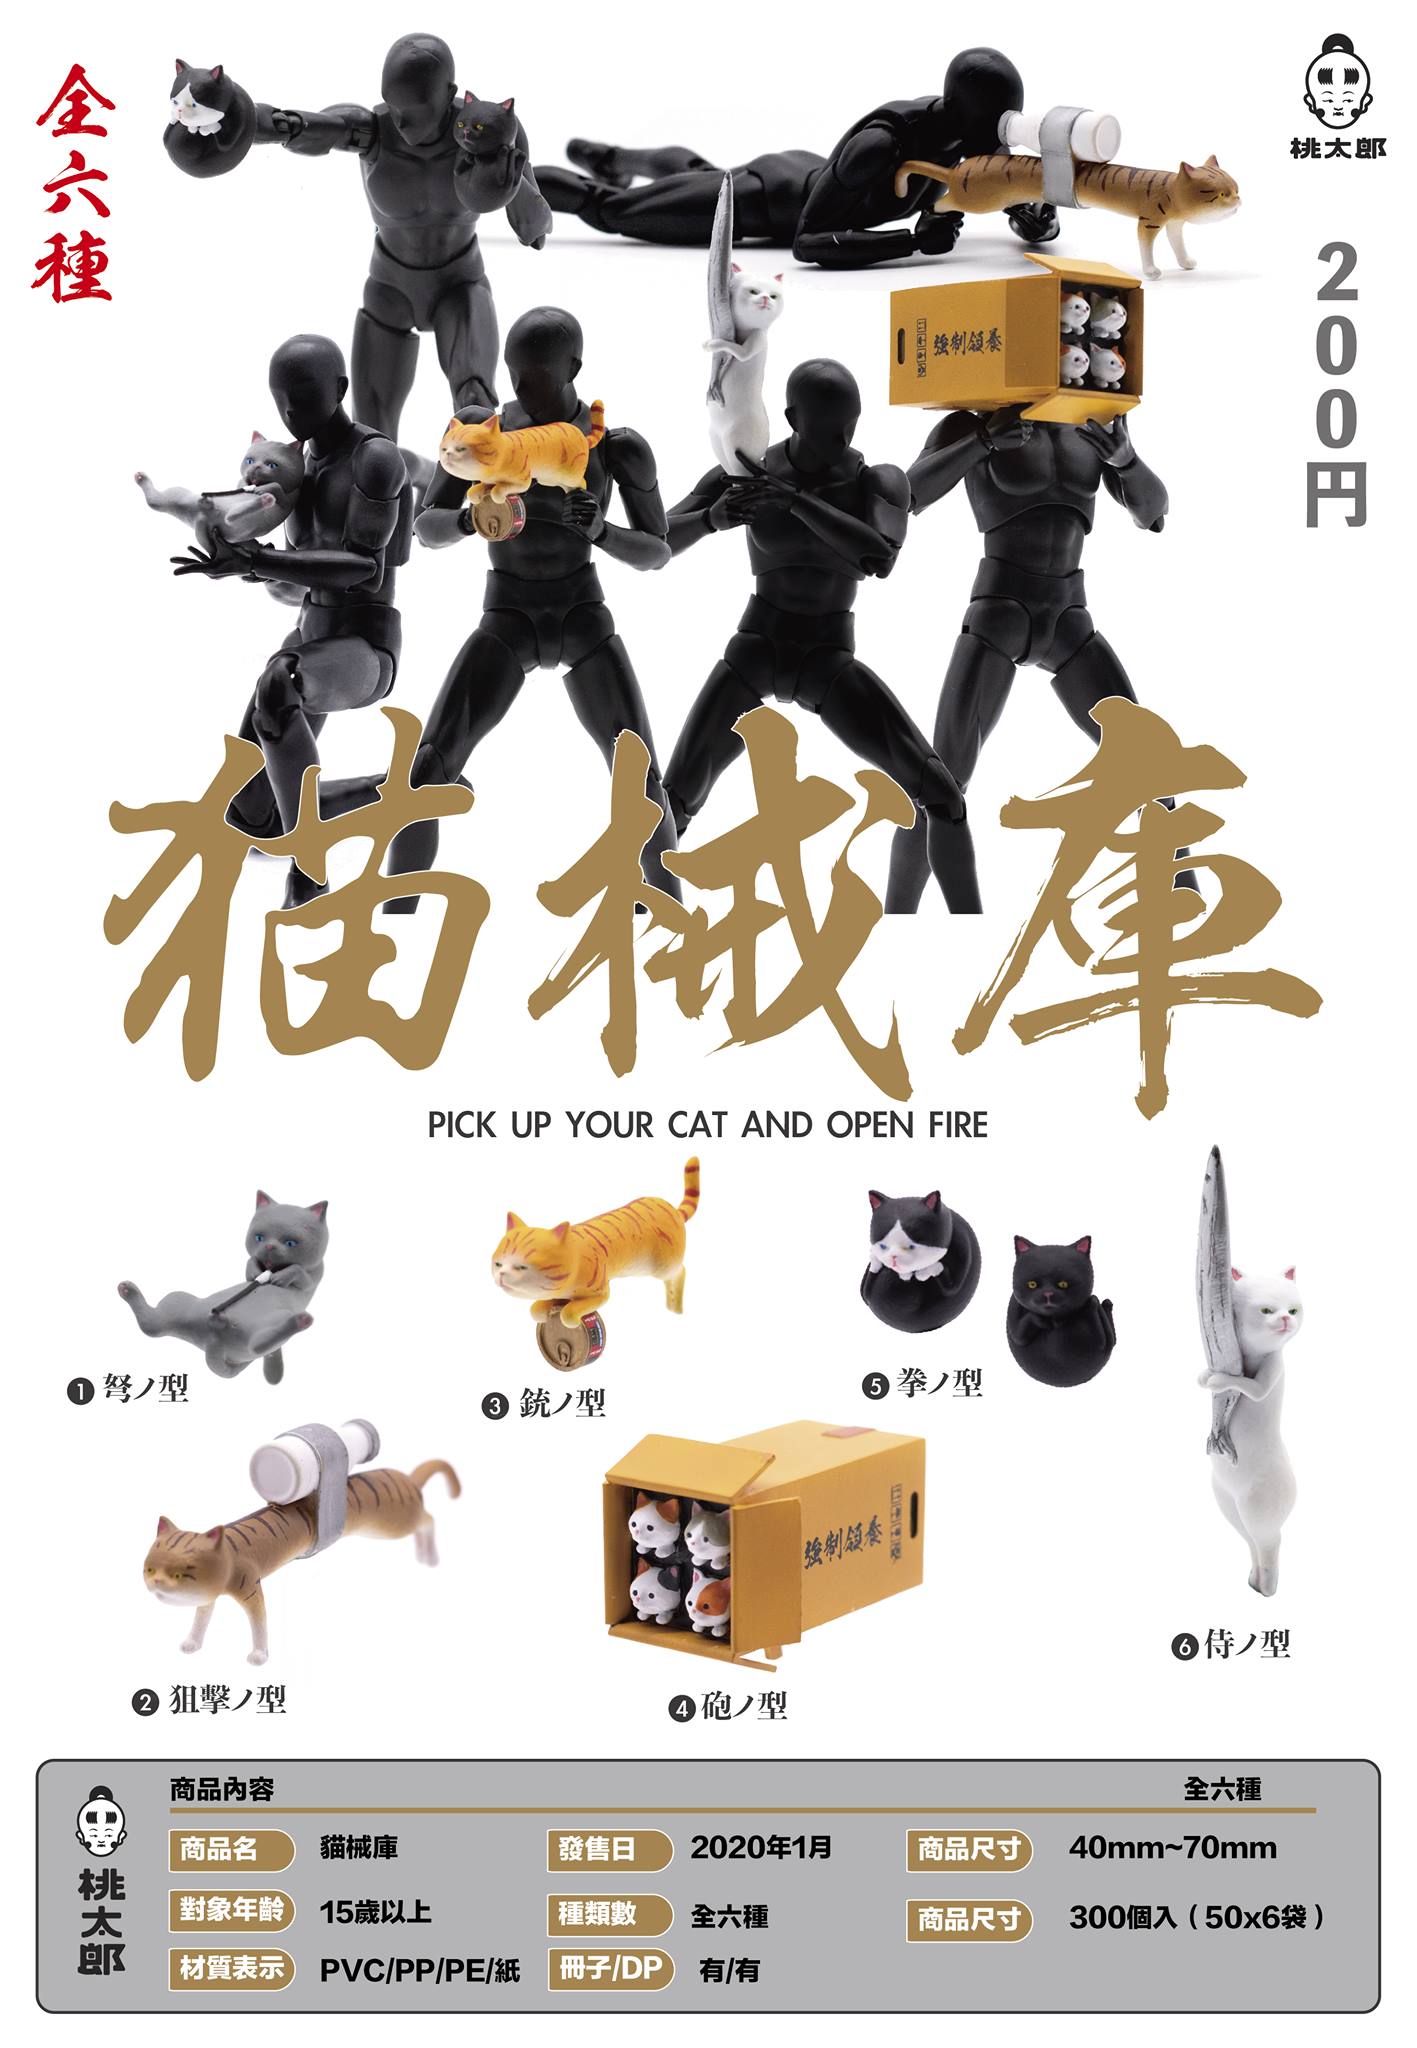 Momotaro Toys Gashapon Pick Up Your Cat And Open Fire 6 Figure Set